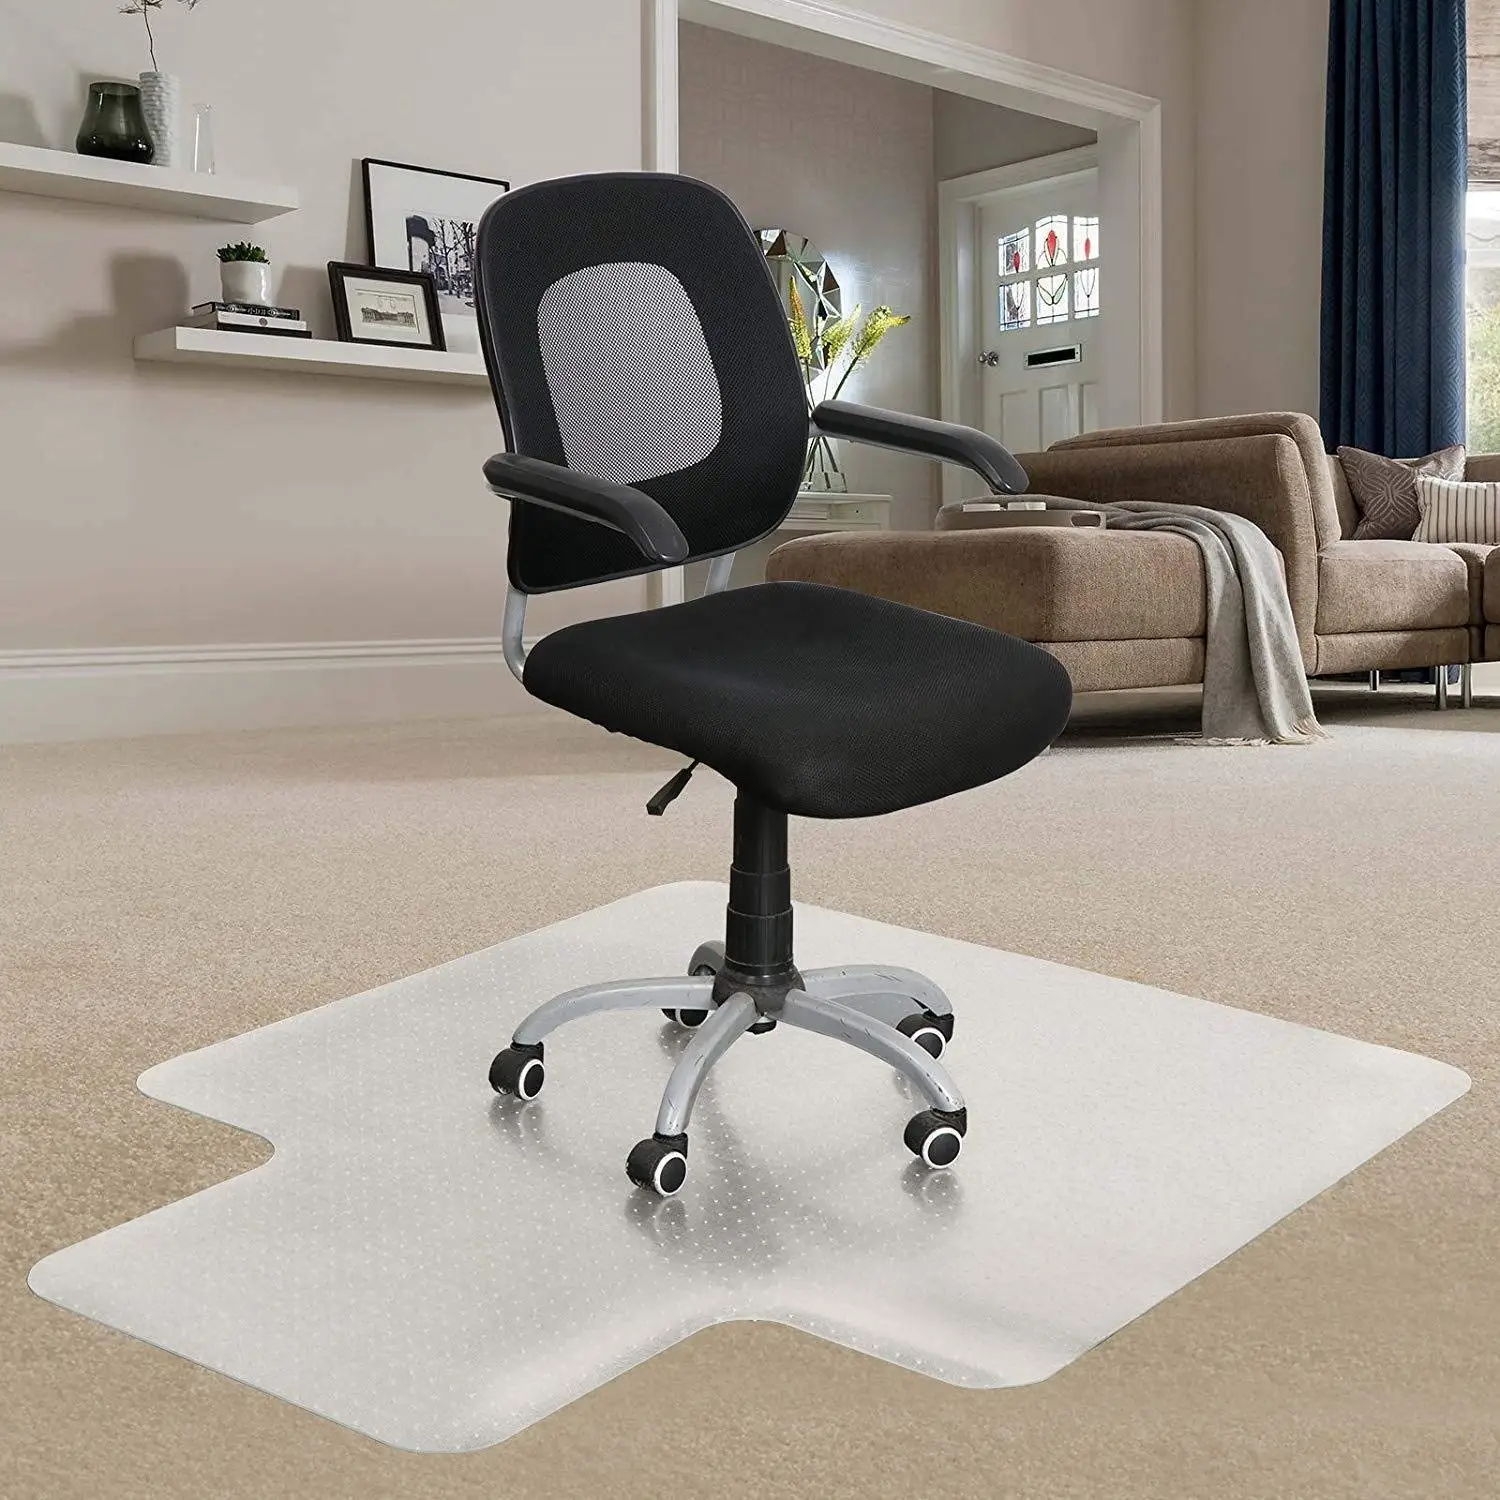 Cheap Home Office Carpet Find Home Office Carpet Deals On Line At